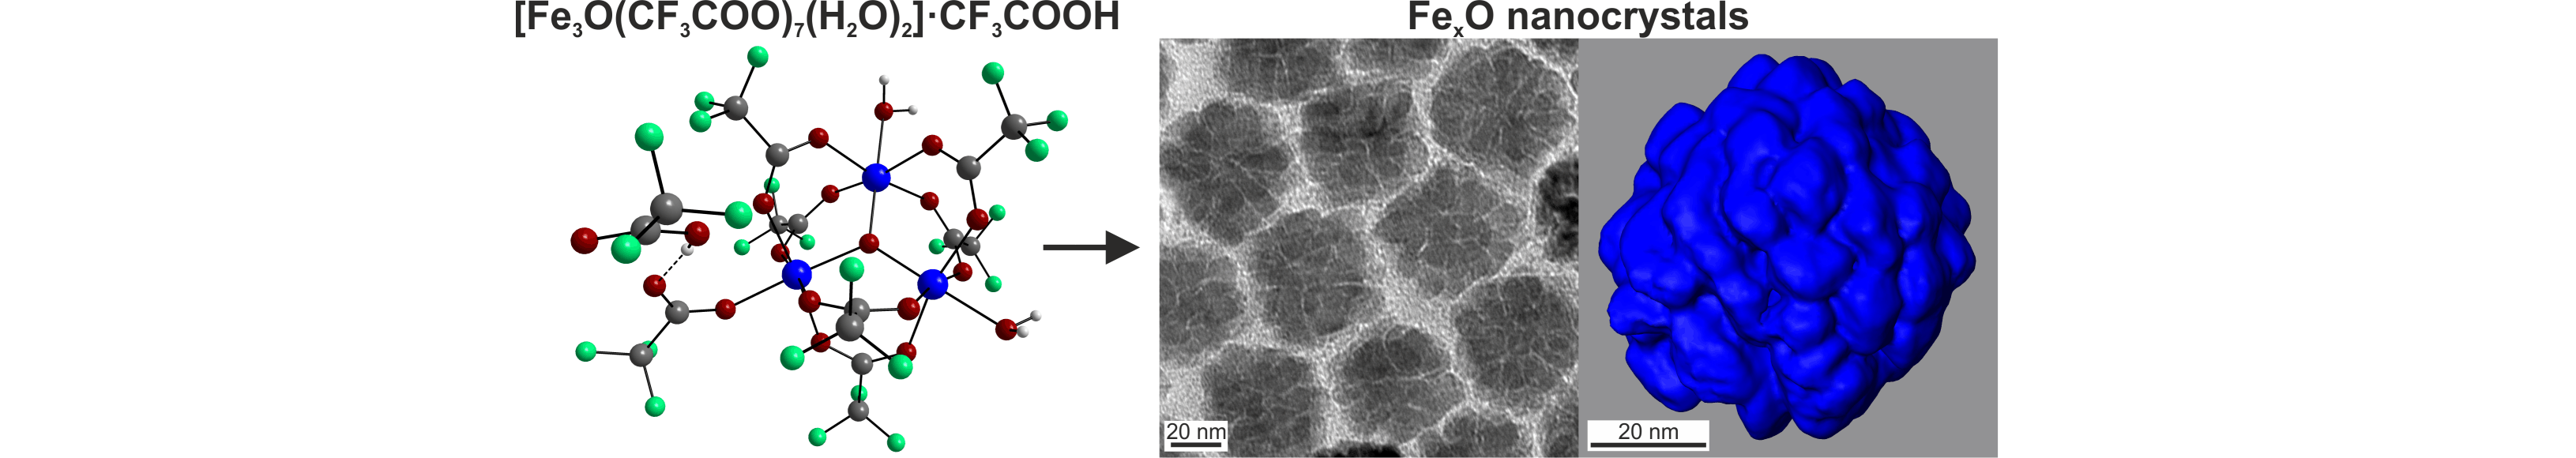 Popcorn-shaped FexO (Wüstite) Nanoparticles from a Single-Source Precursor: Colloidal Synthesis and Magnetic Properties